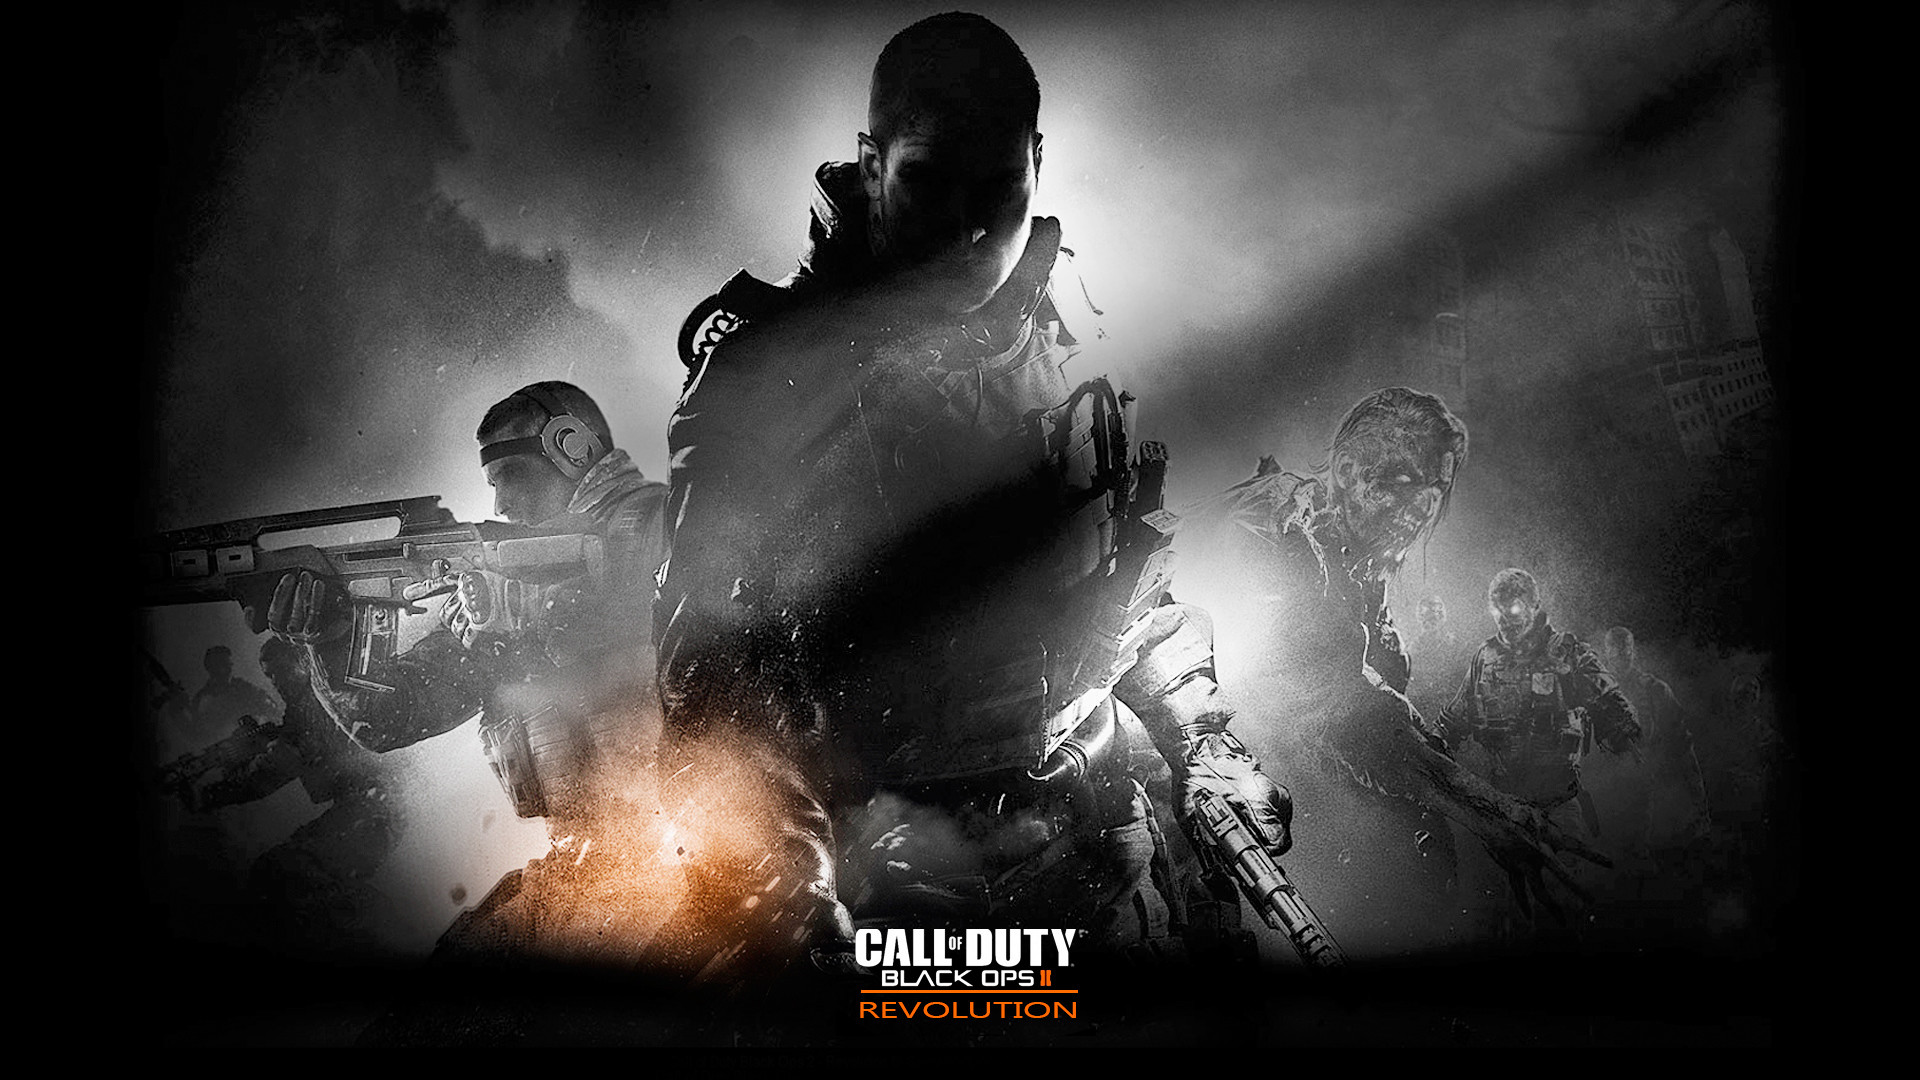 1920x1080 Call Of Duty Black Ops 2 Revolution